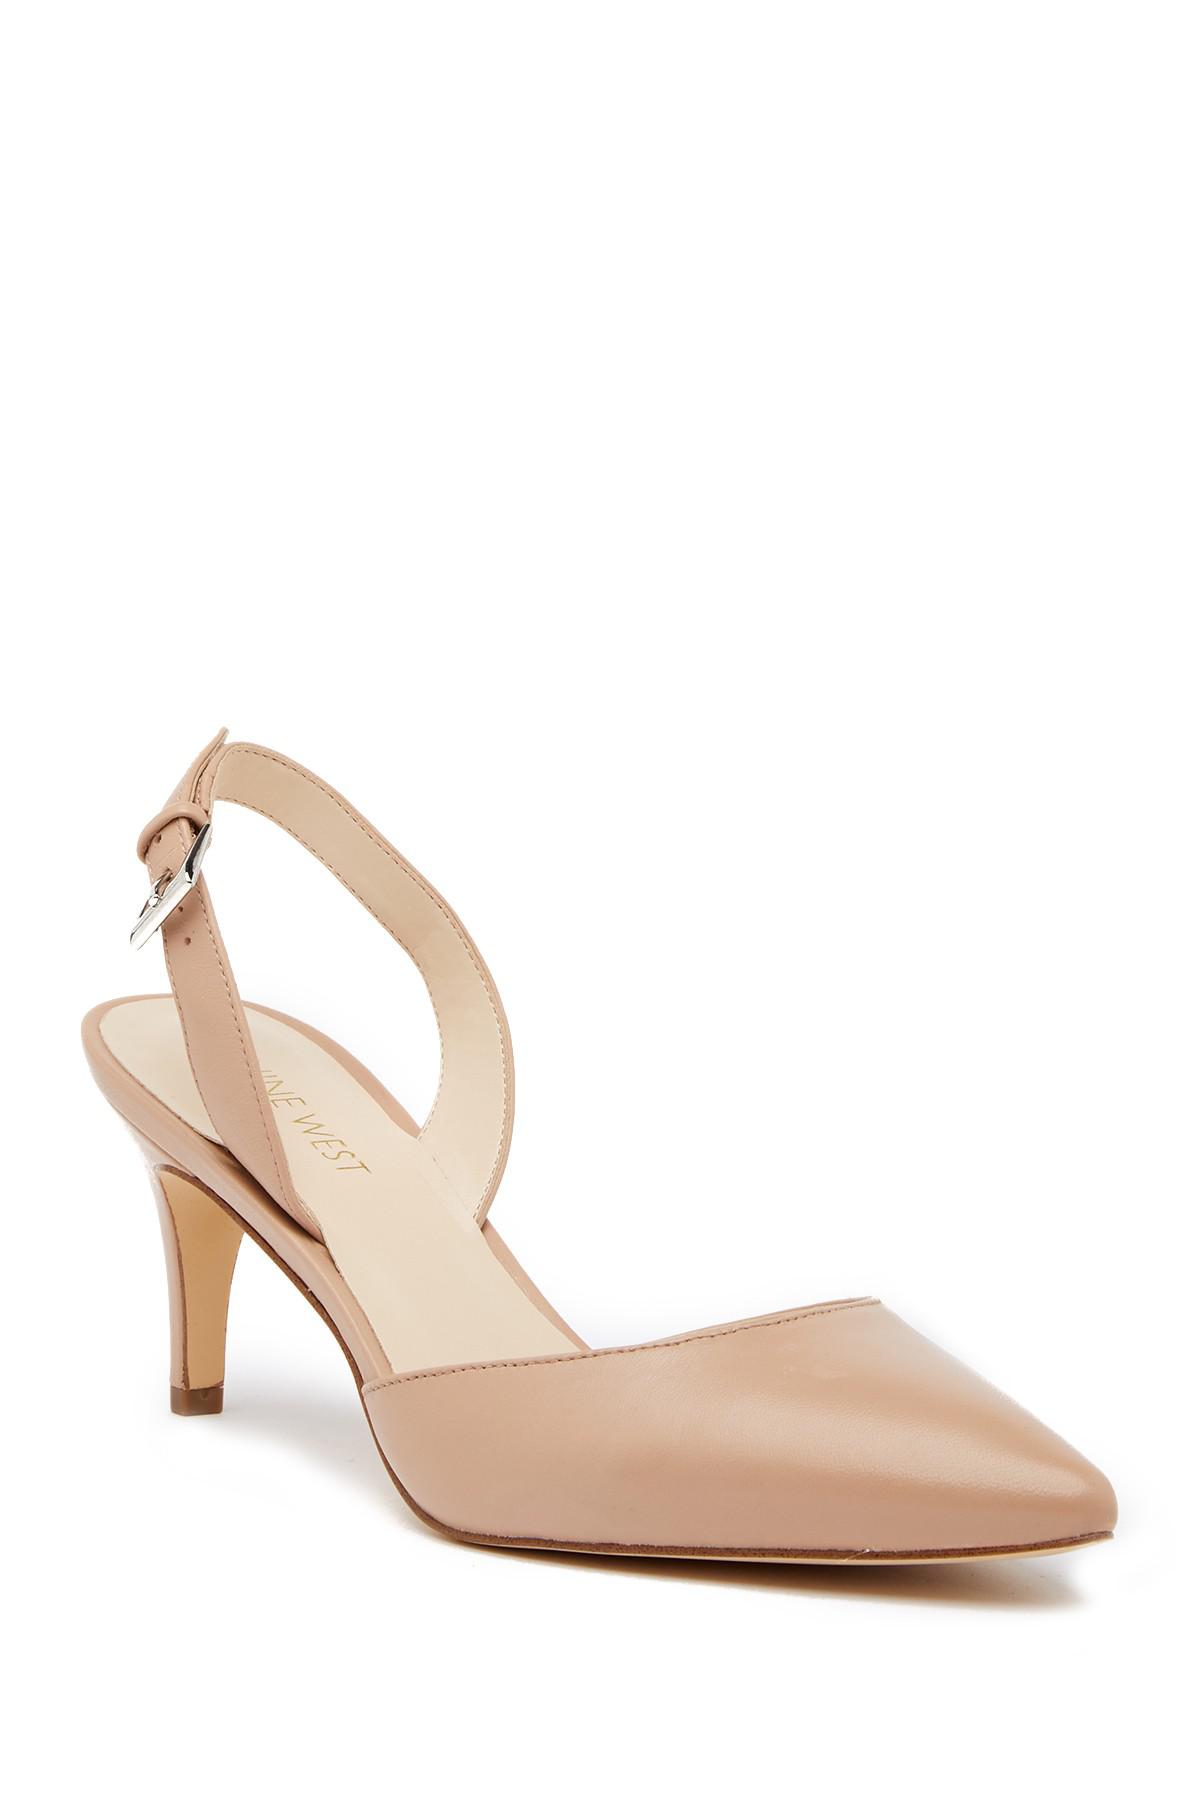 Nine West Epiphany Slingback Leather Pump - Wide Width Available - Lyst